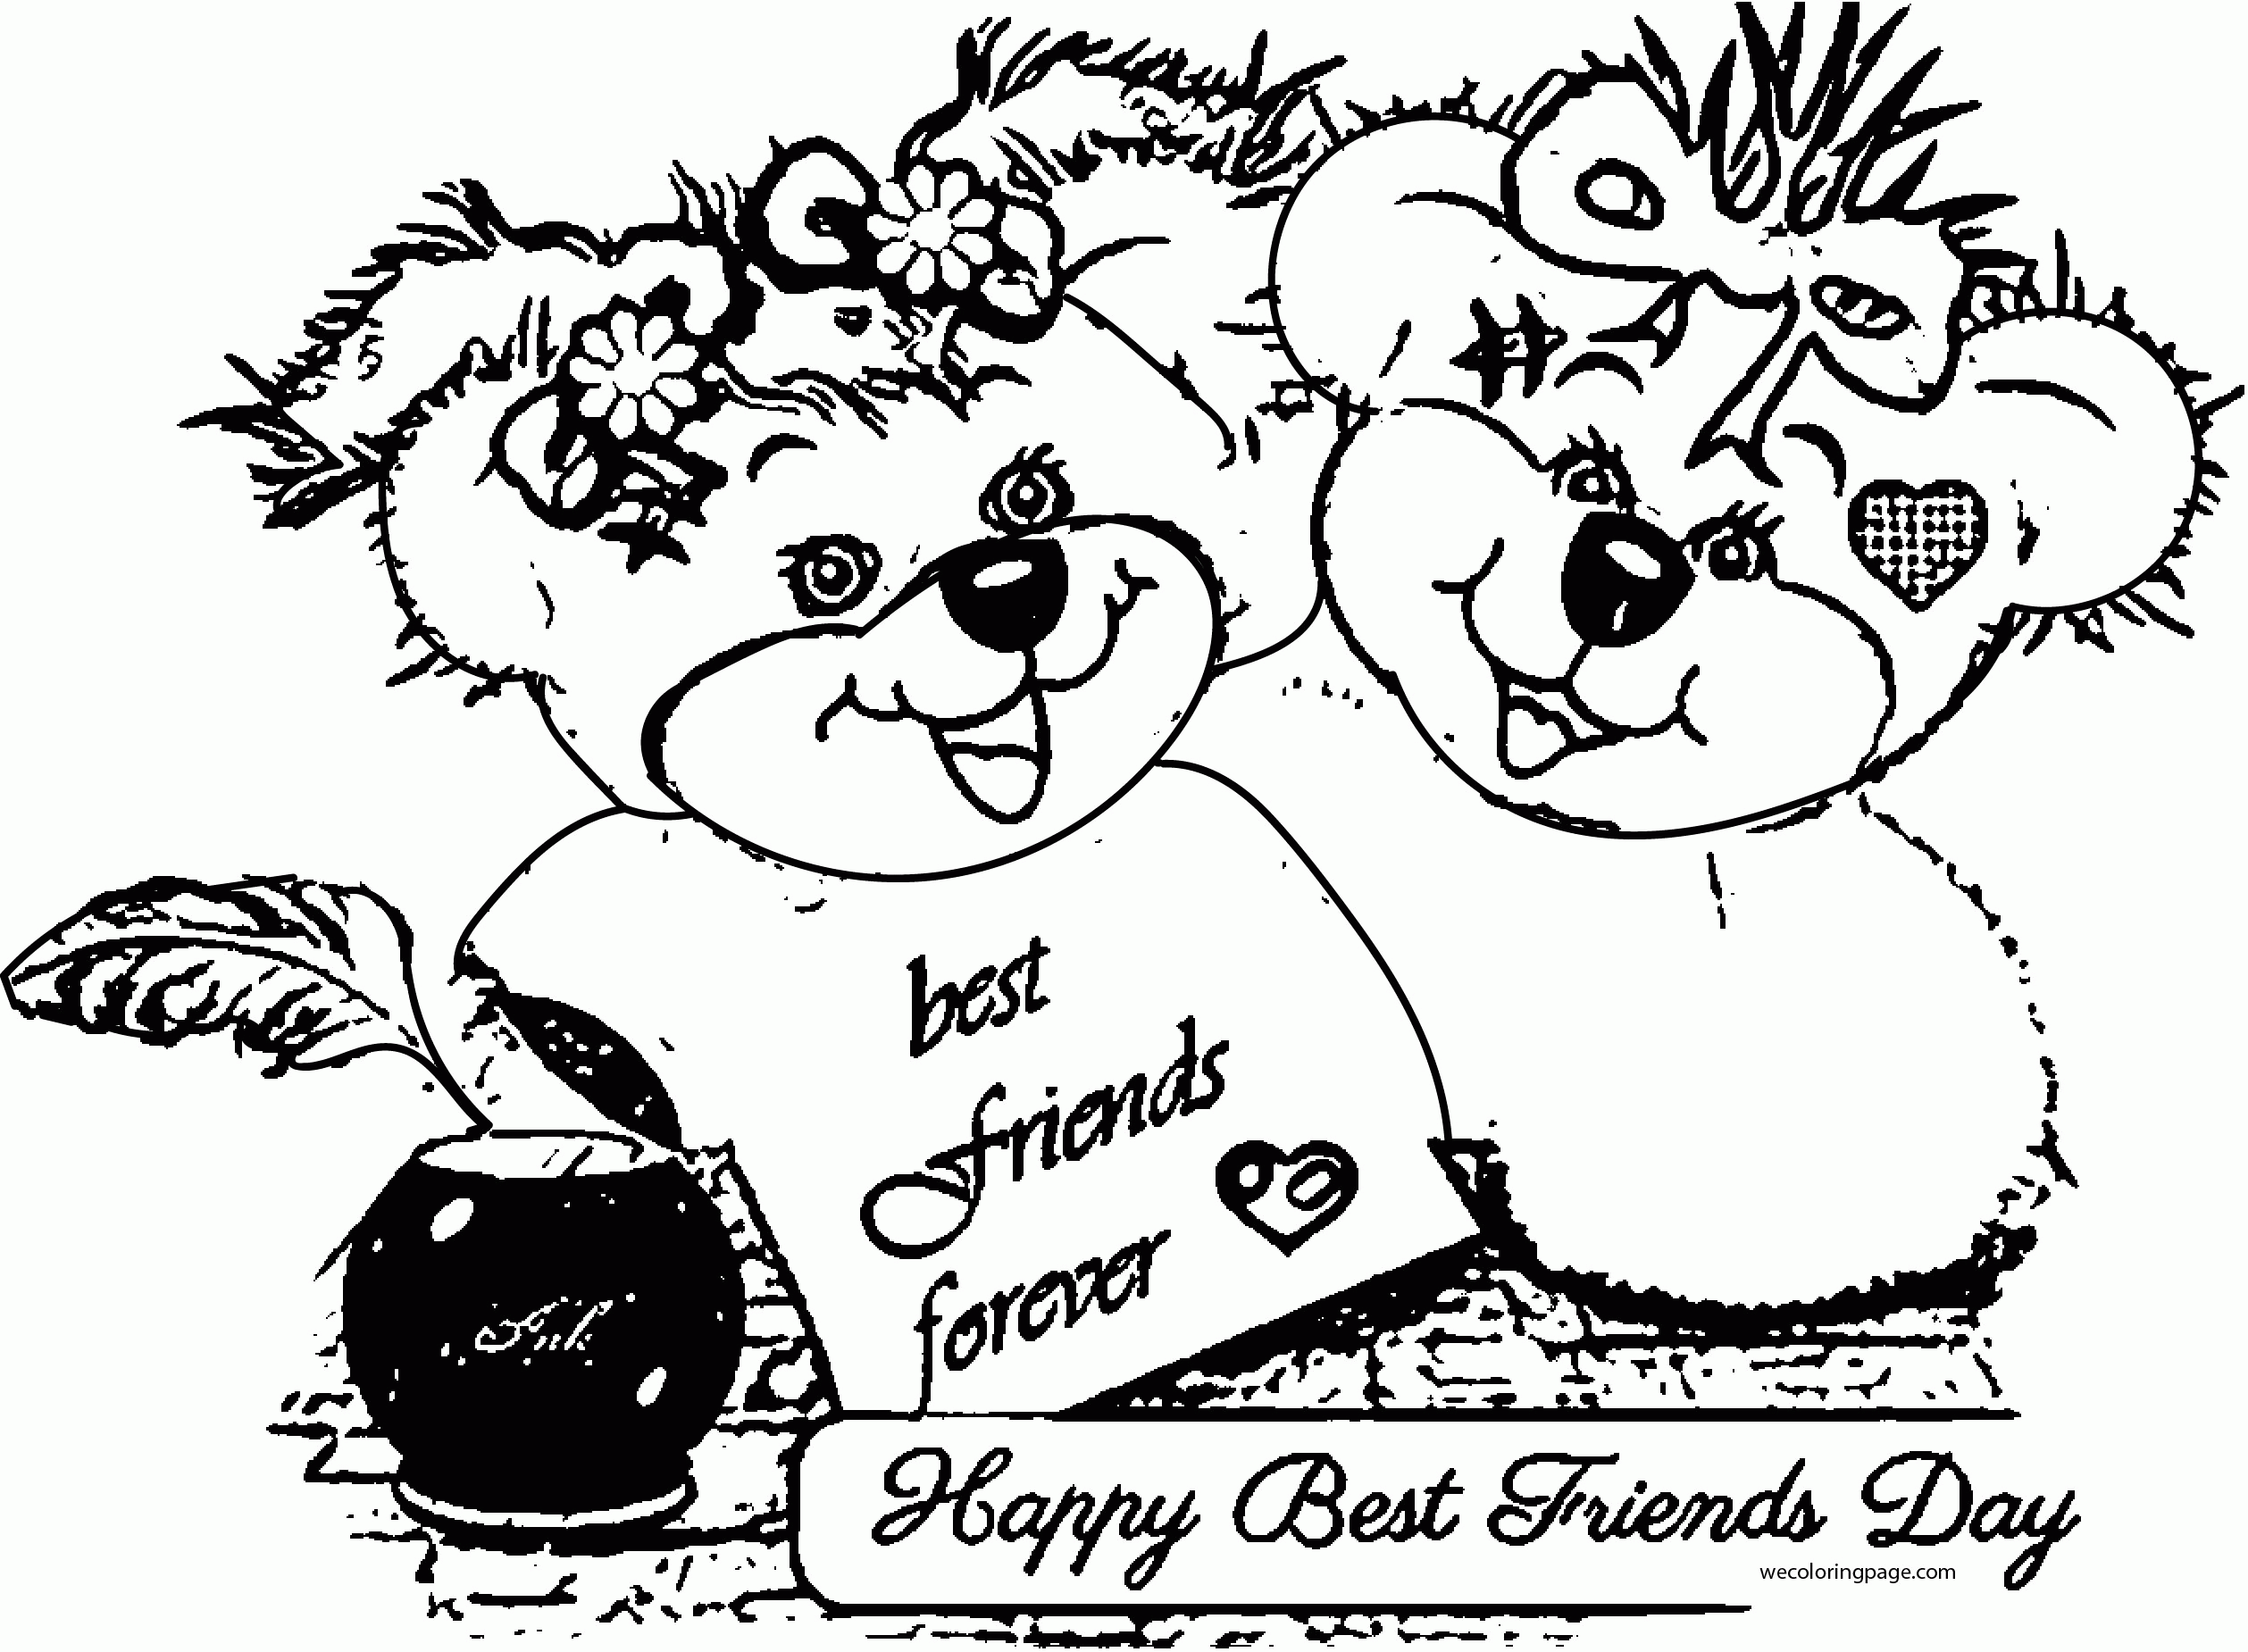 Friendship With Messages Best Friends Day Cards Wishes Coloring ...